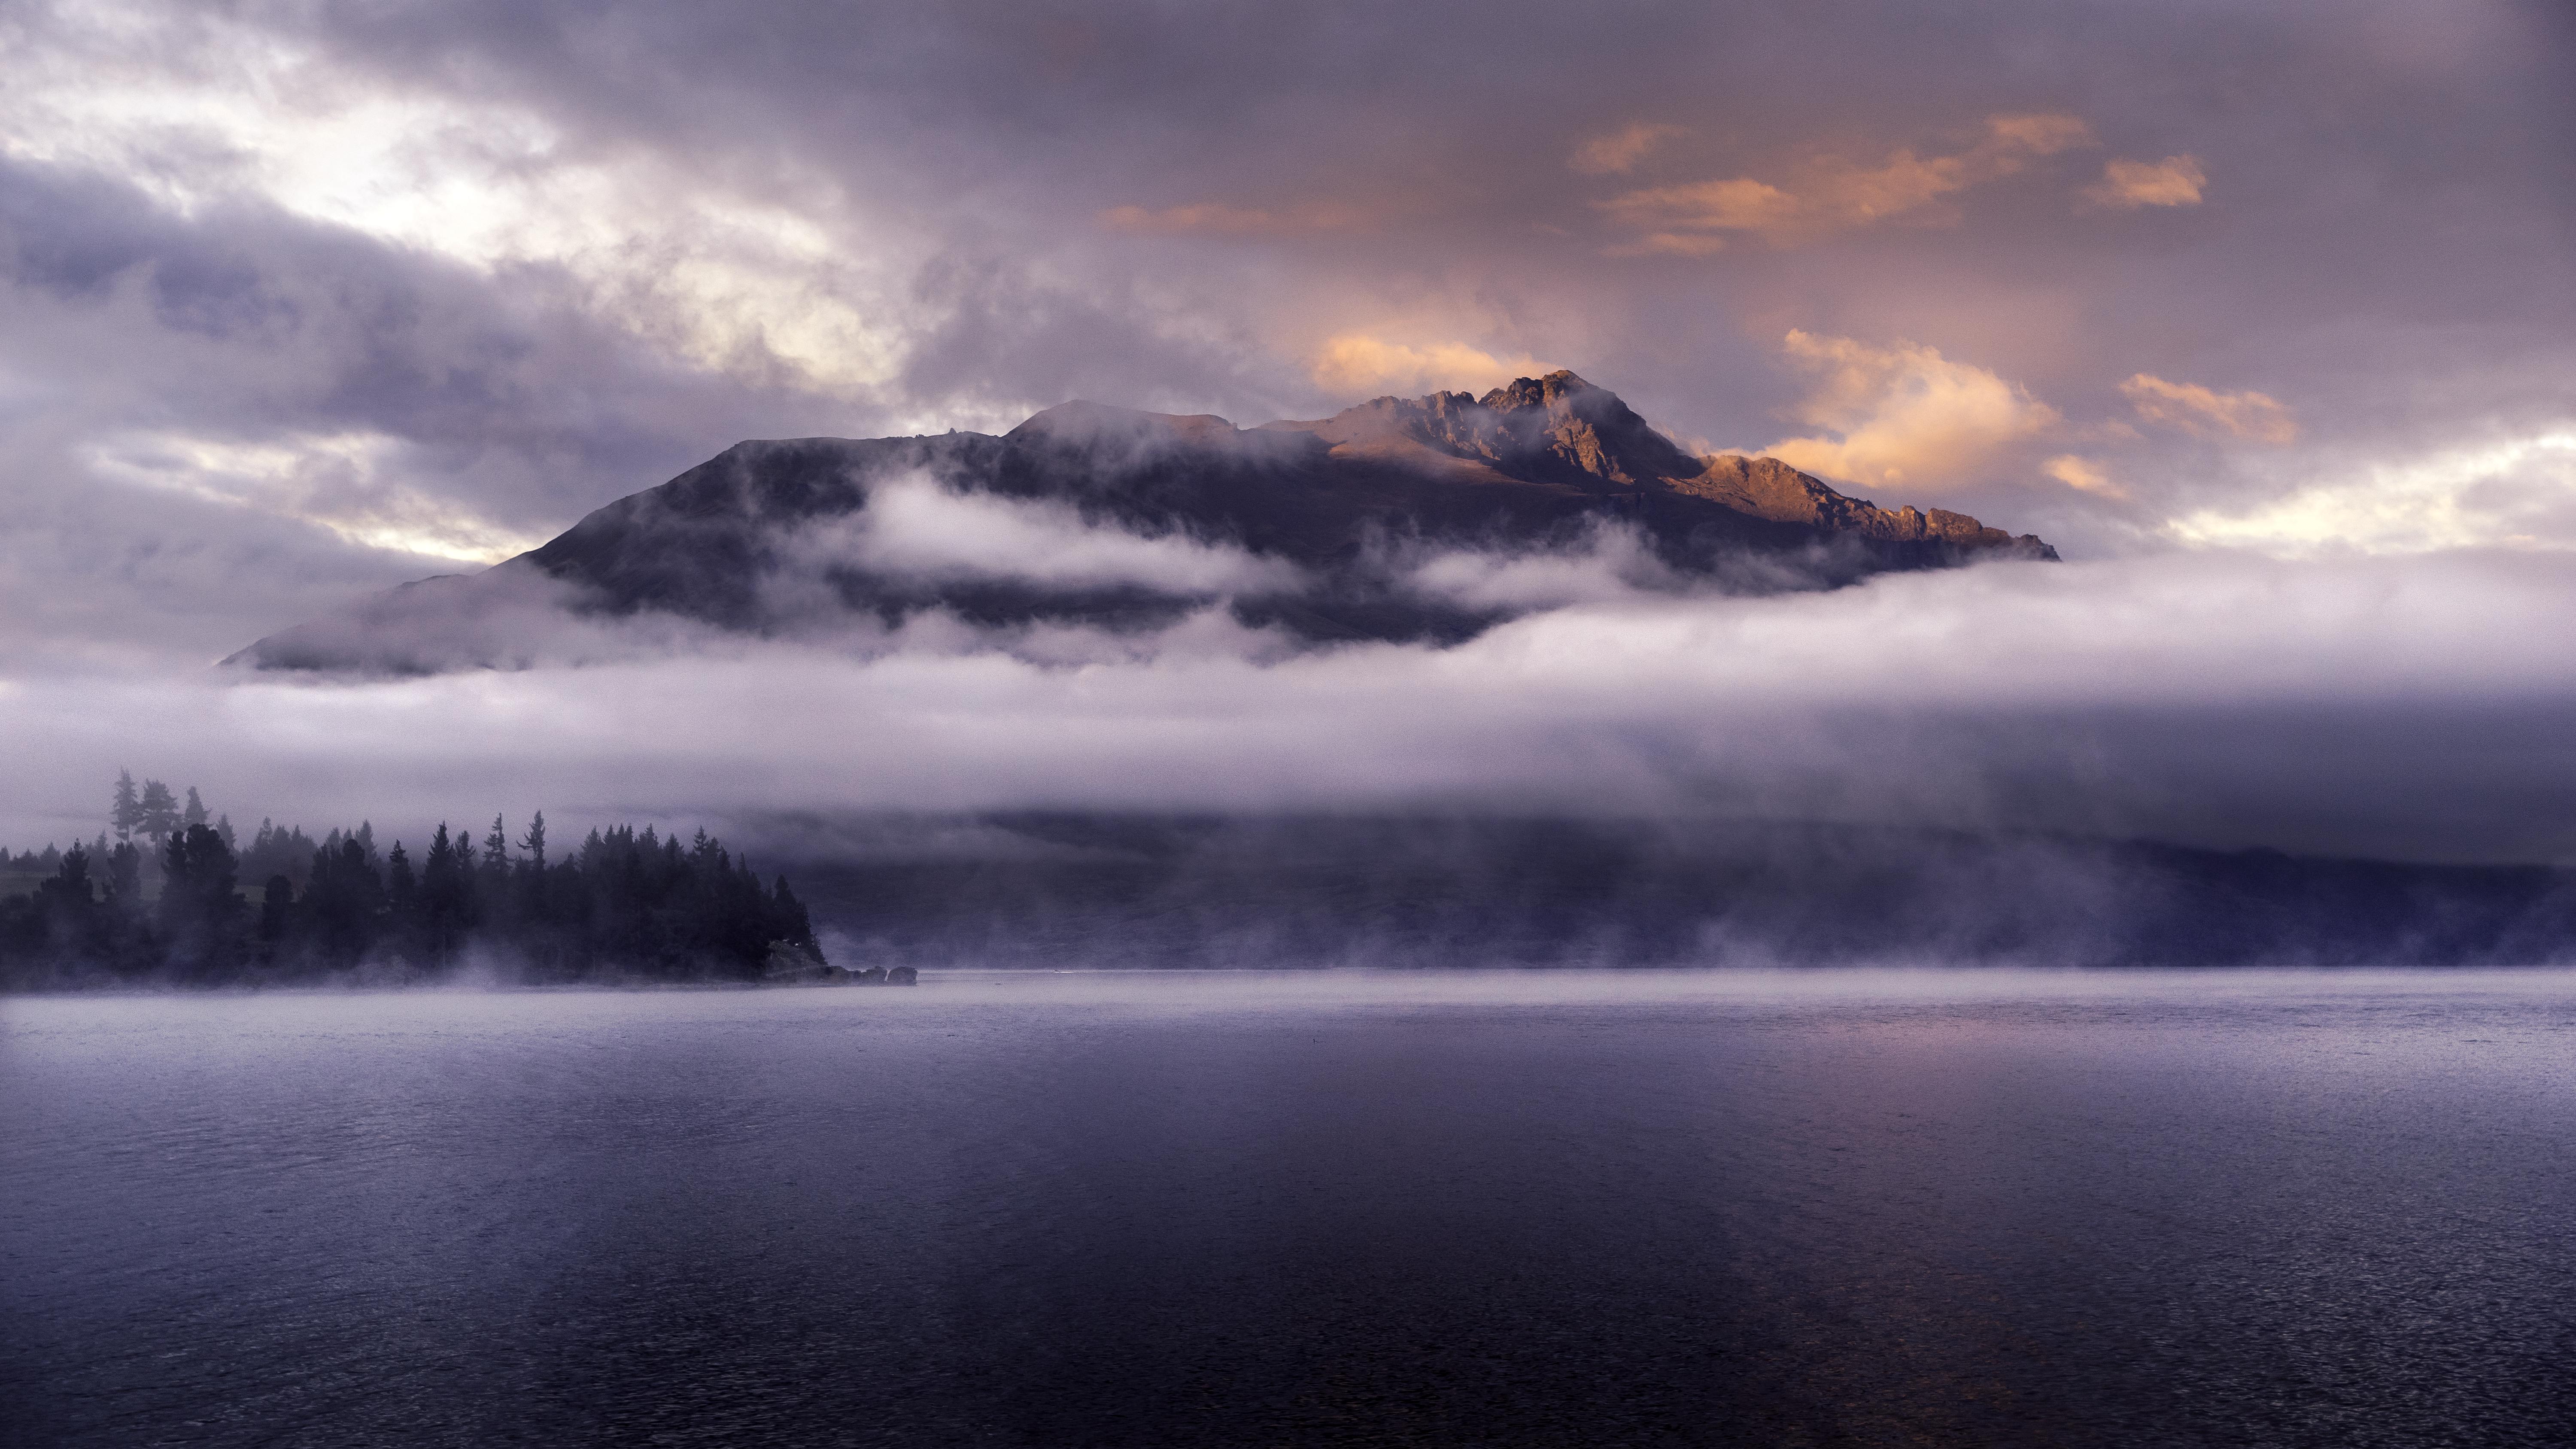 new zealand, tops, fog, nature, mountains, clouds, vertex, lake, queenstown cell phone wallpapers